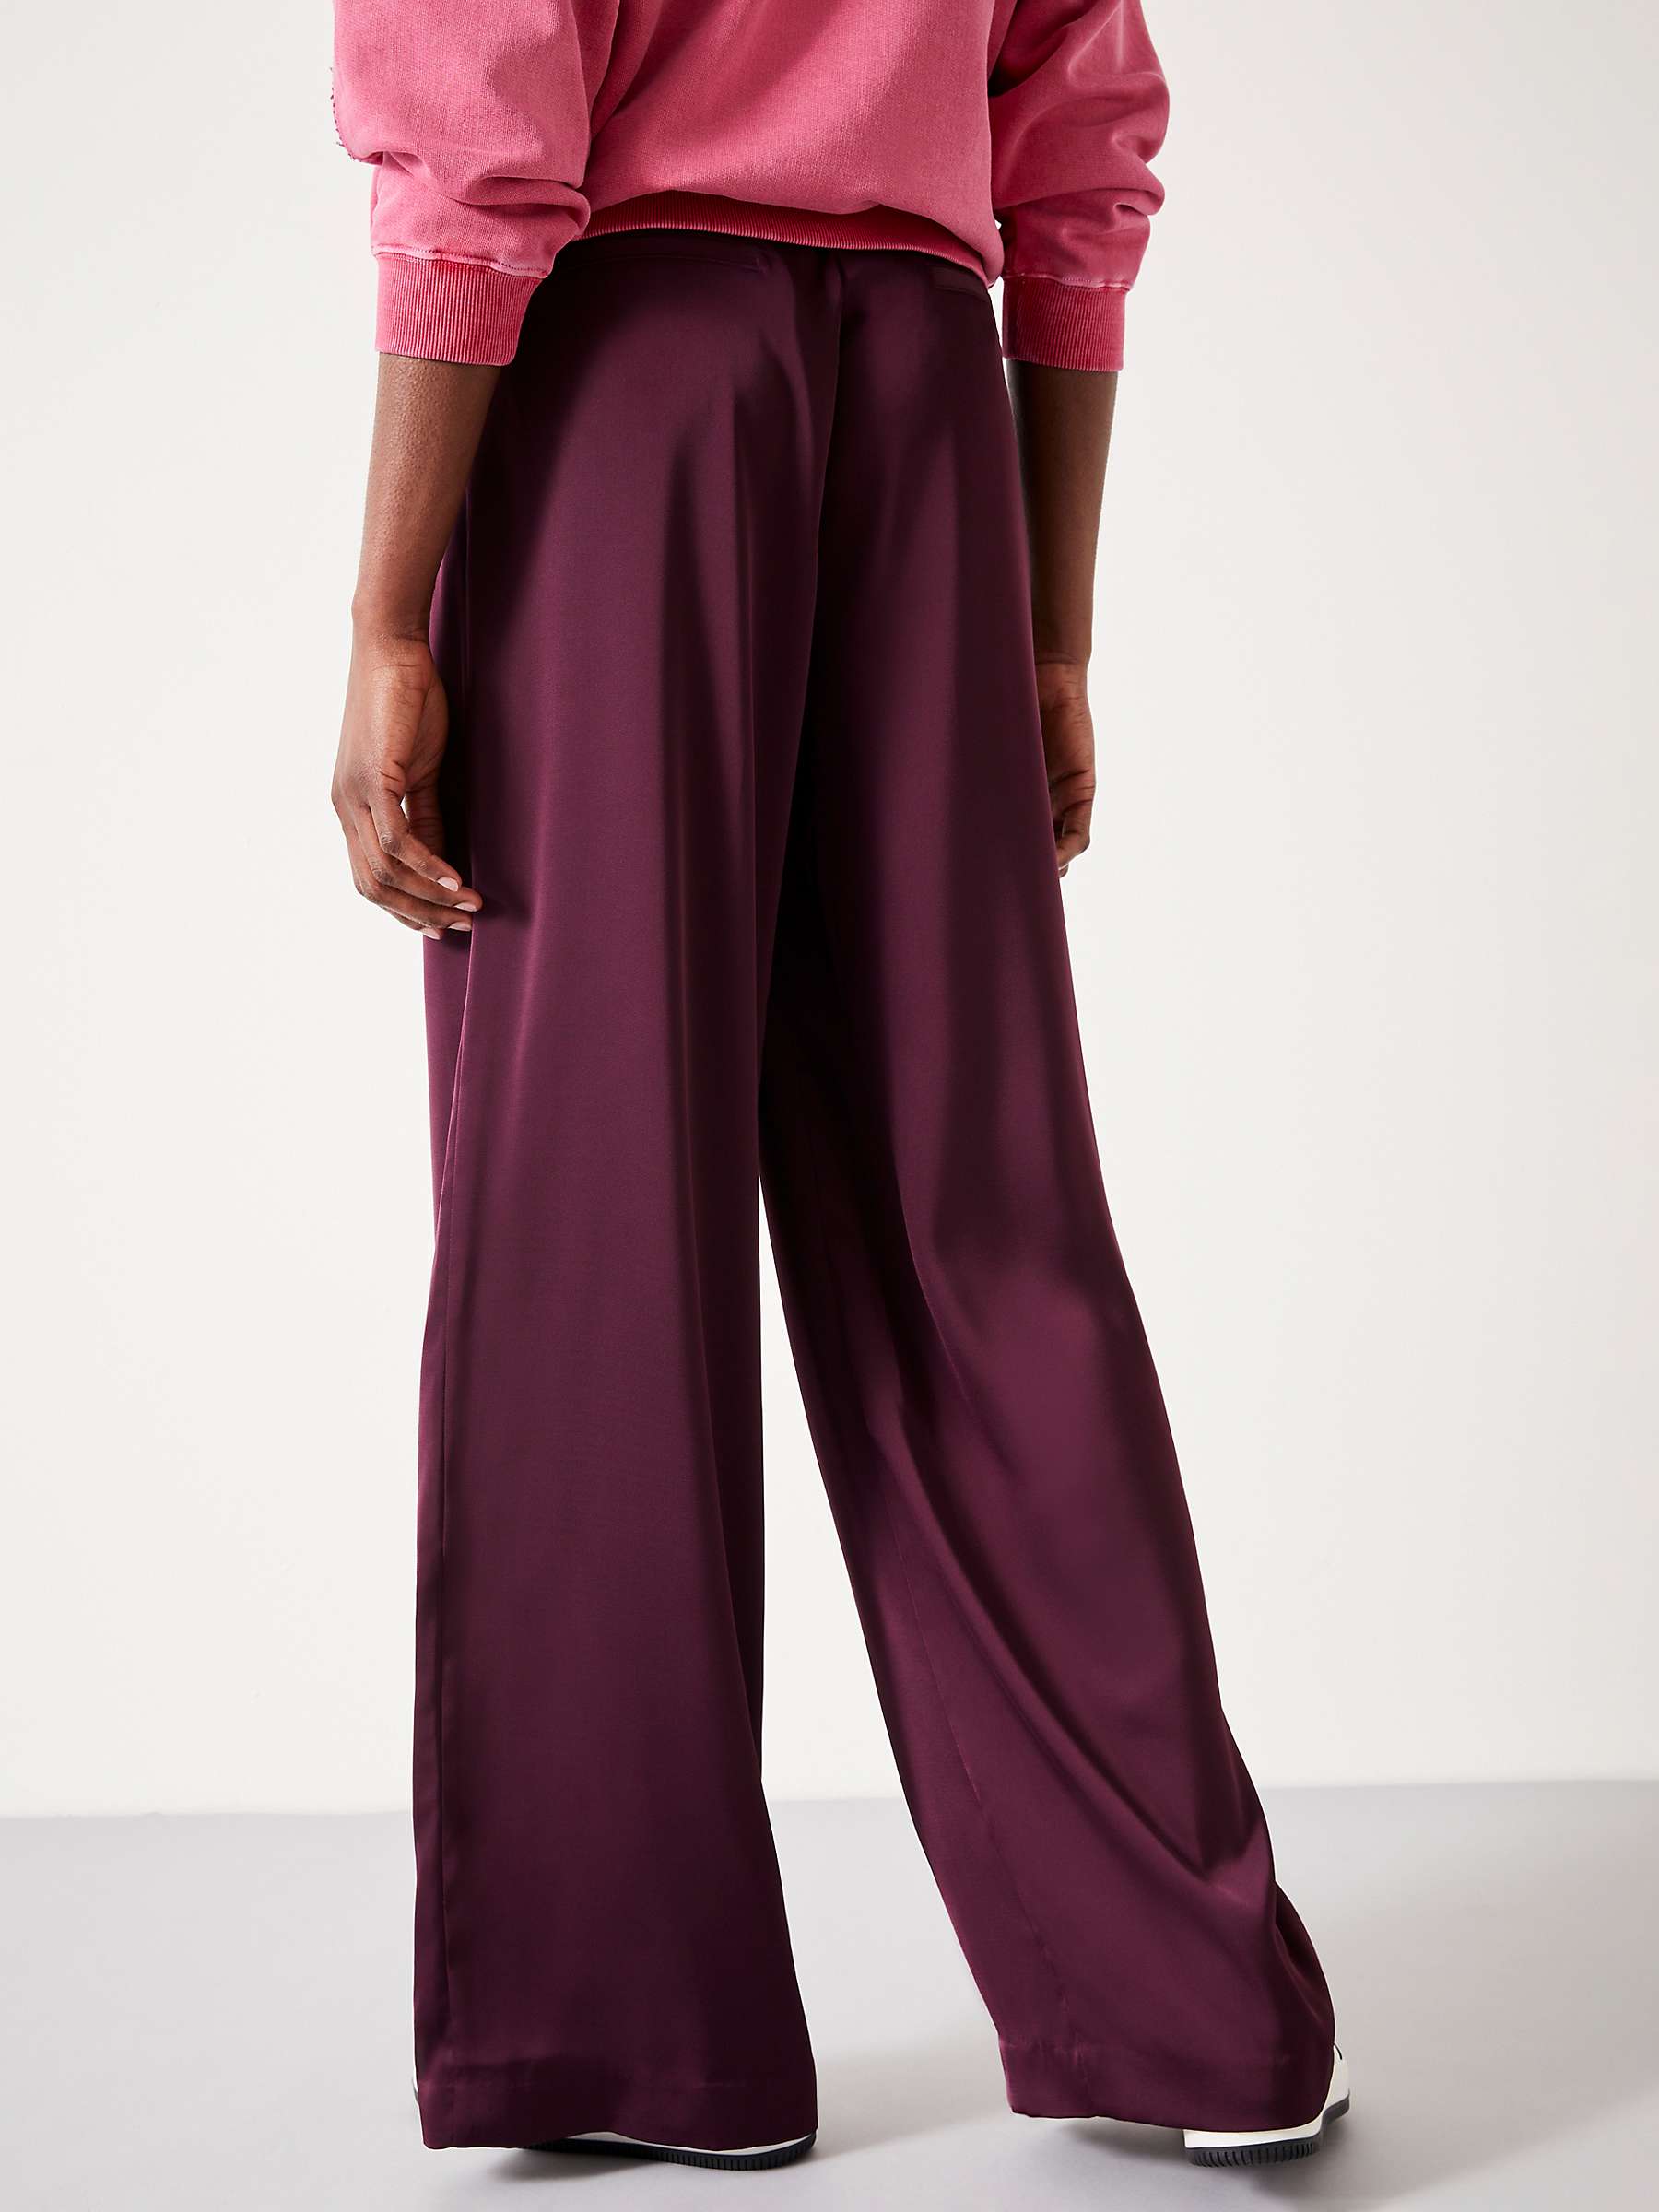 melt the lady by color satin pants